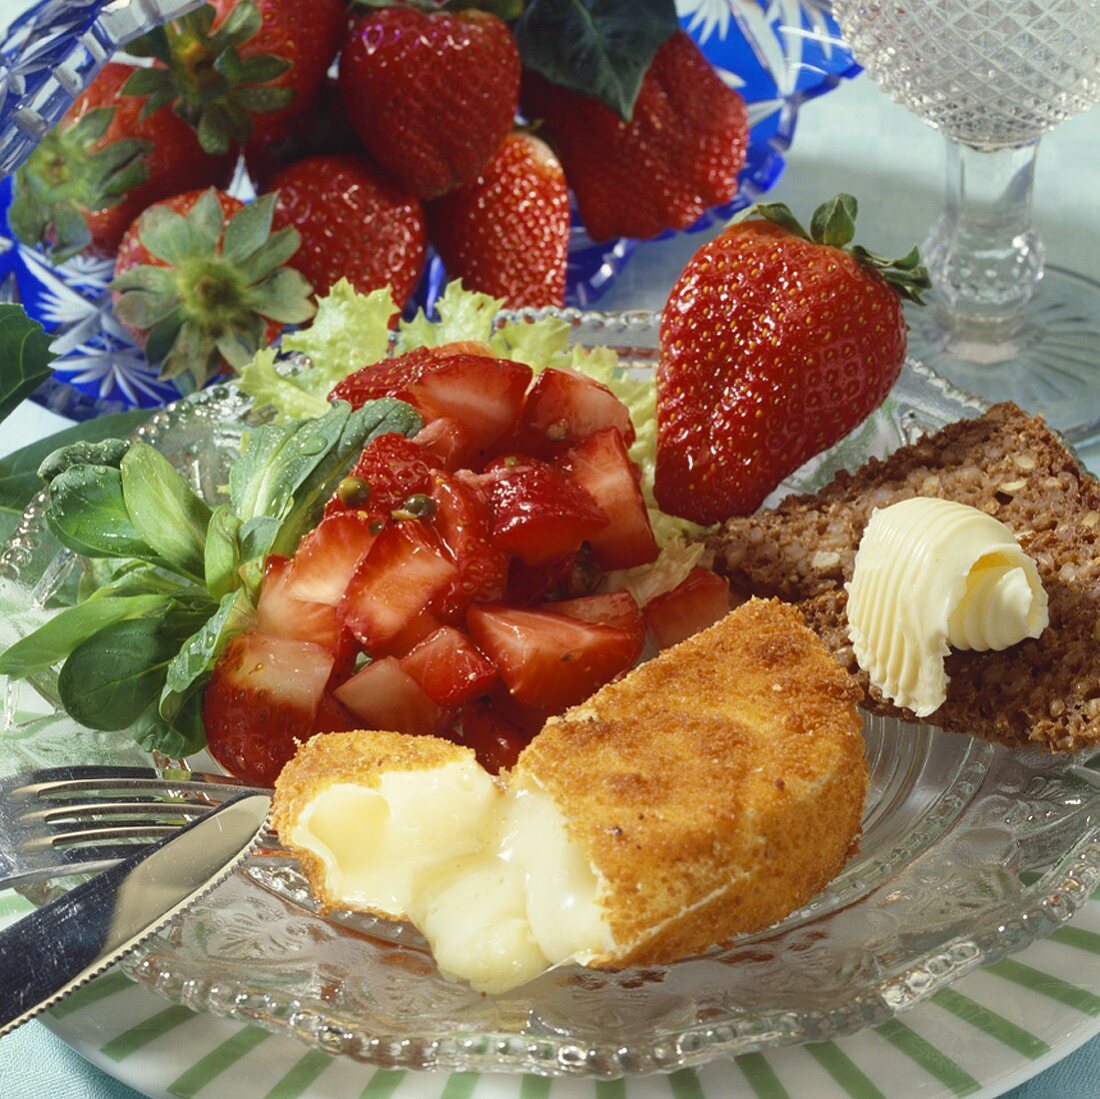 Strawberry relish with fried Camembert